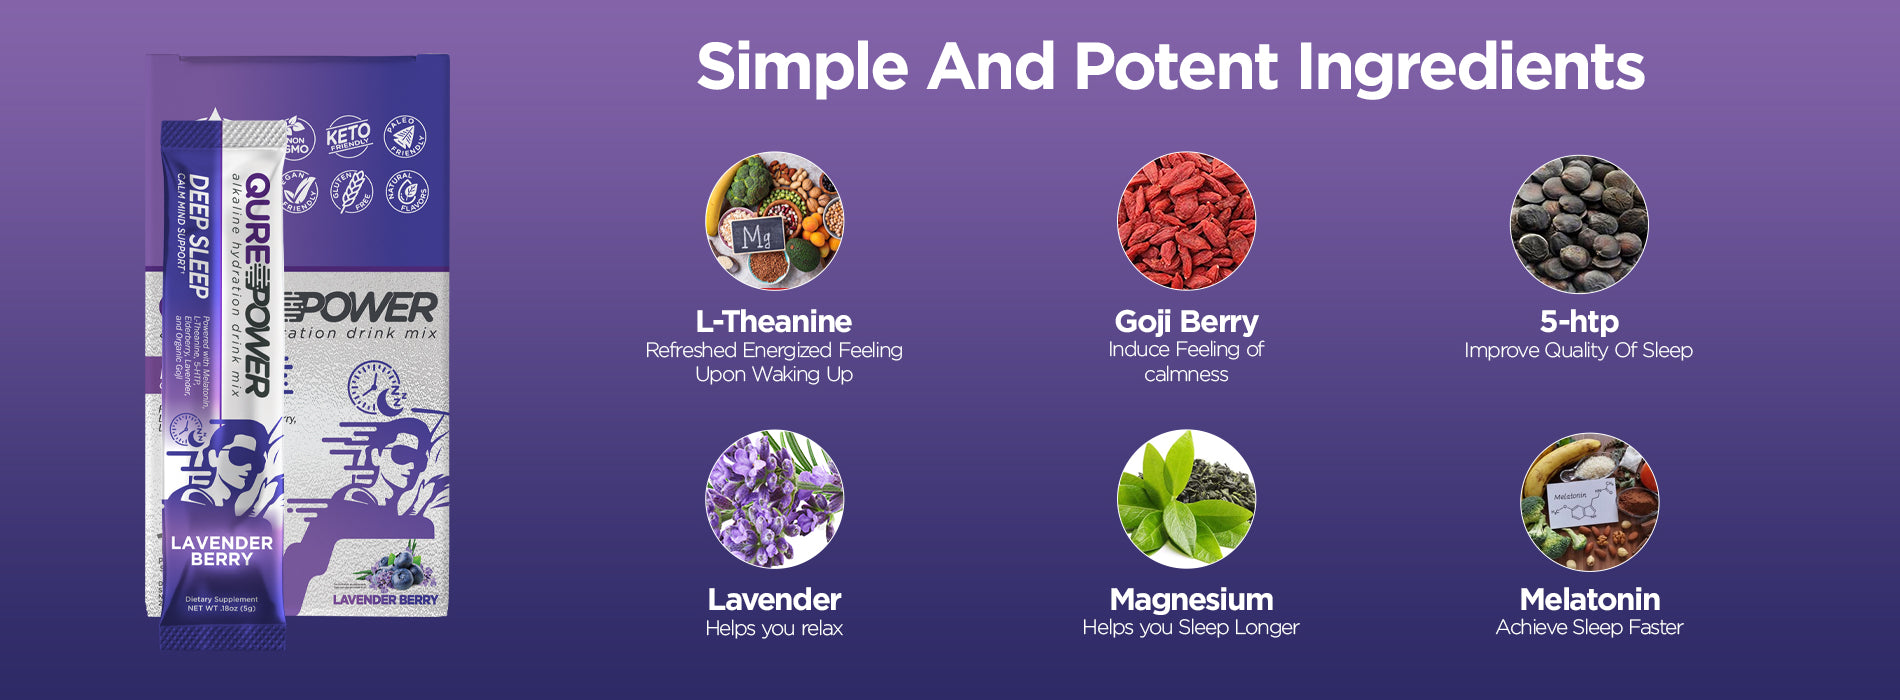 simple and potent ingredients